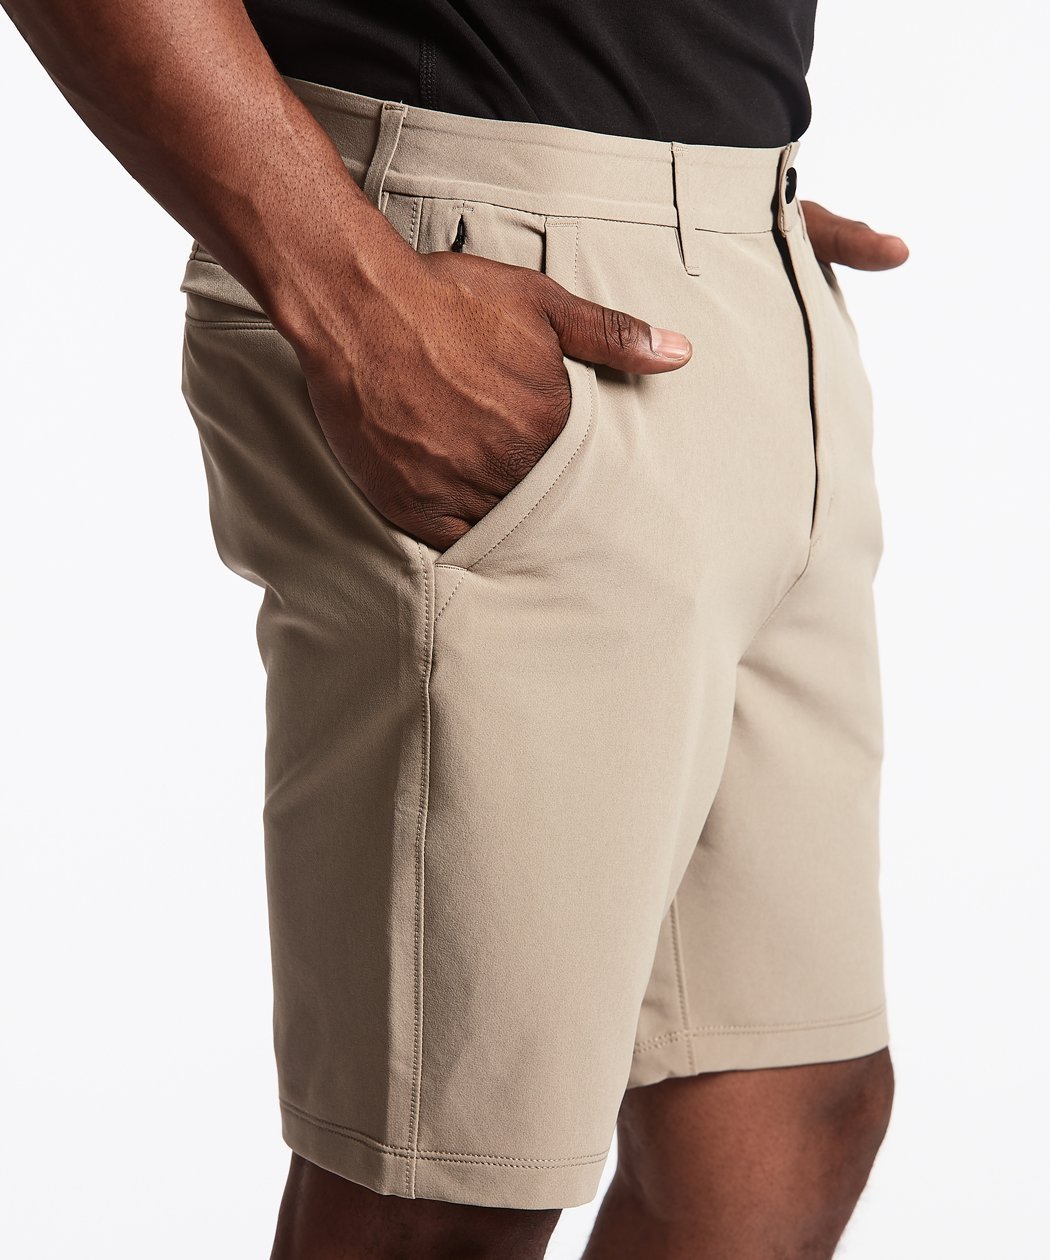 Public Rec Shorts Are Stylish And Comfy, Making Them The Absolute Best